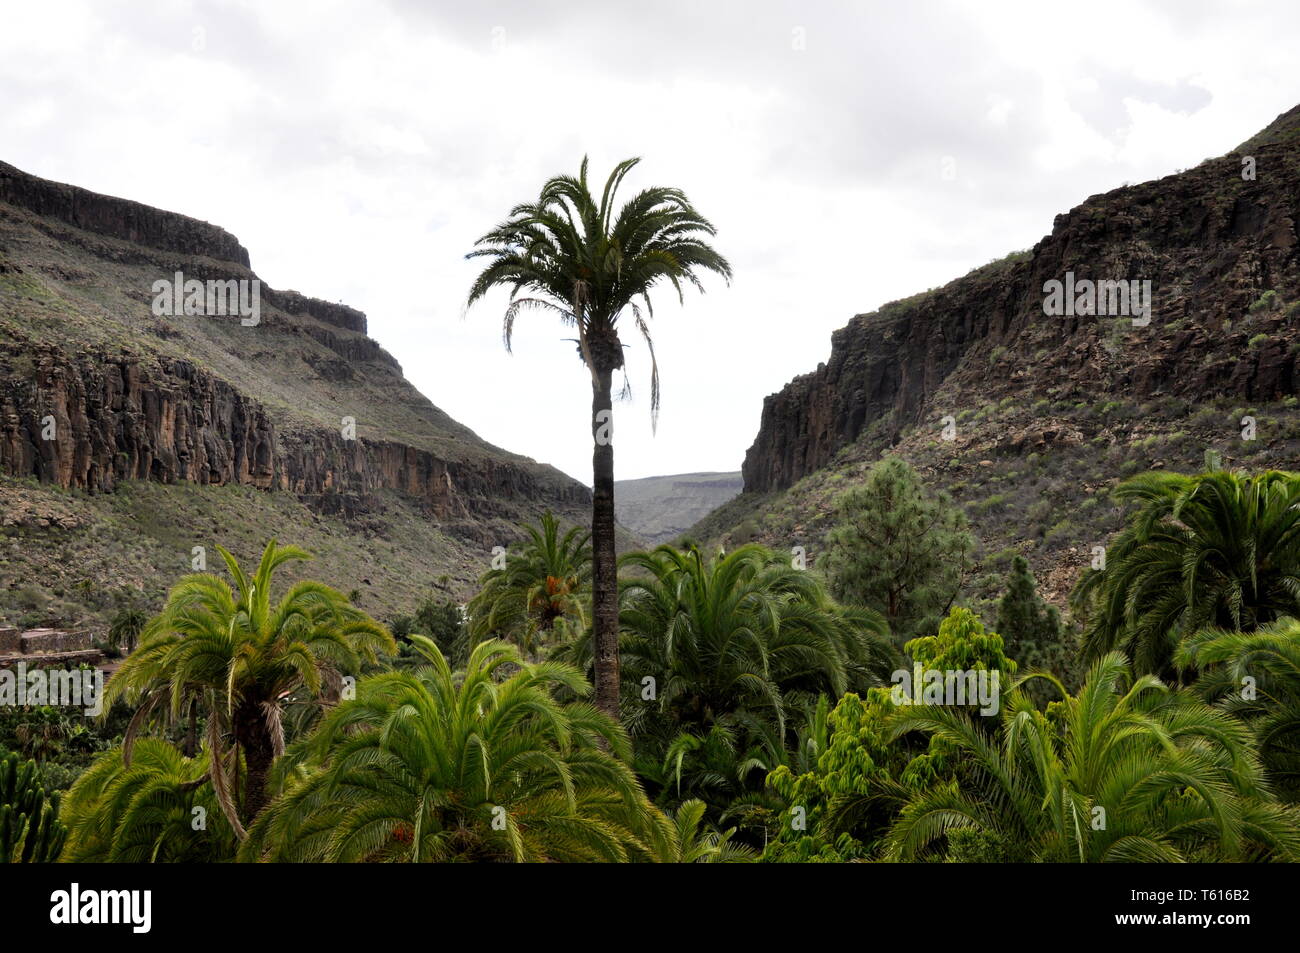 Mountain landscape with palm tree Stock Photo